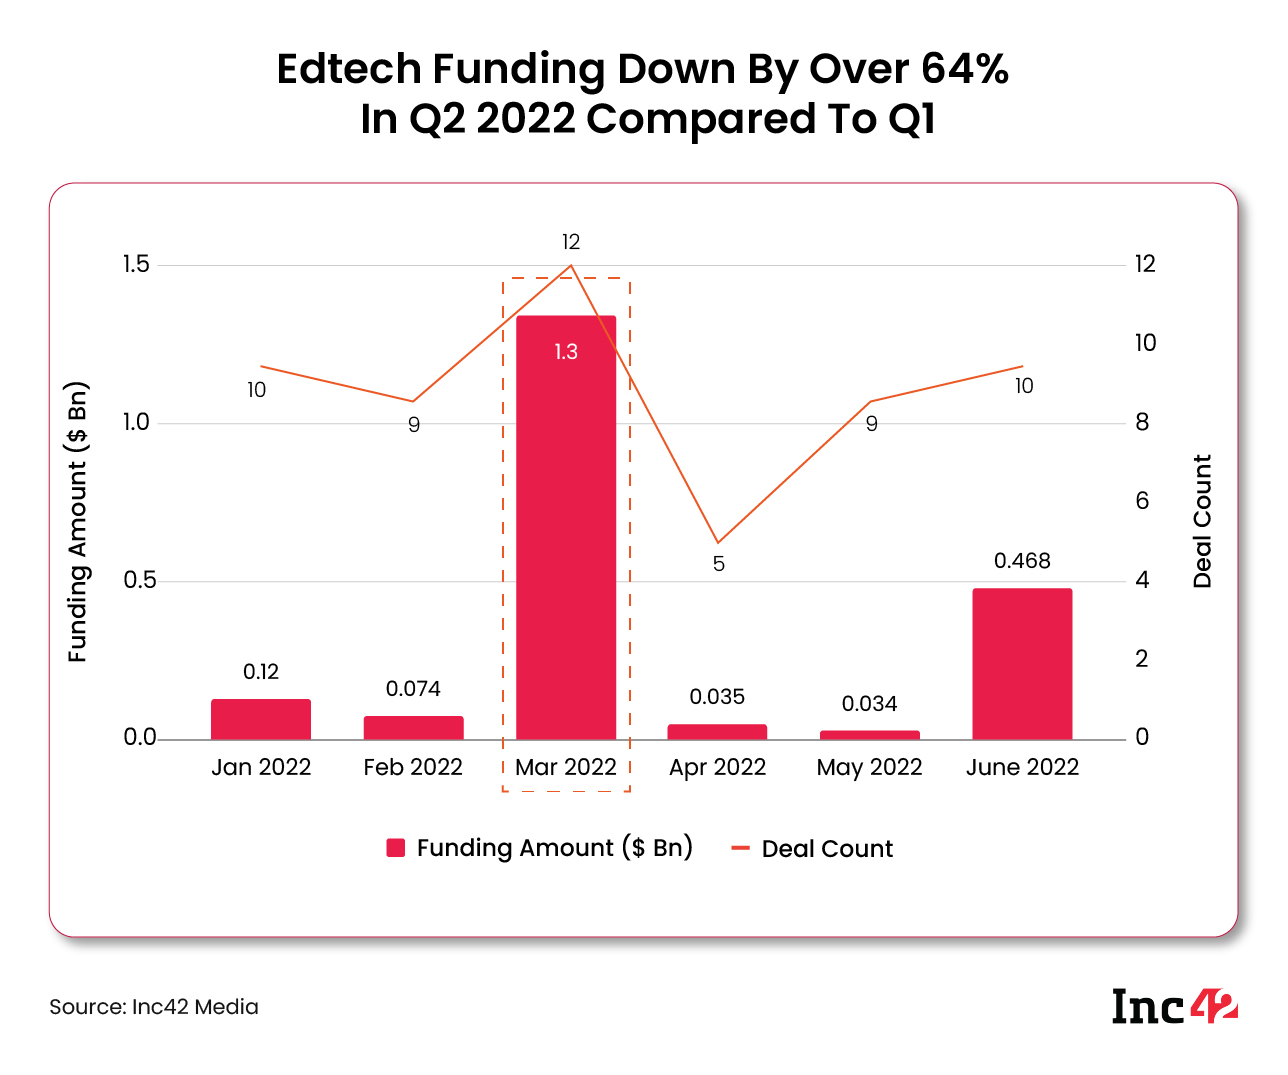 Edtech funding down by over 64% in Q2 2022 compared to Q1